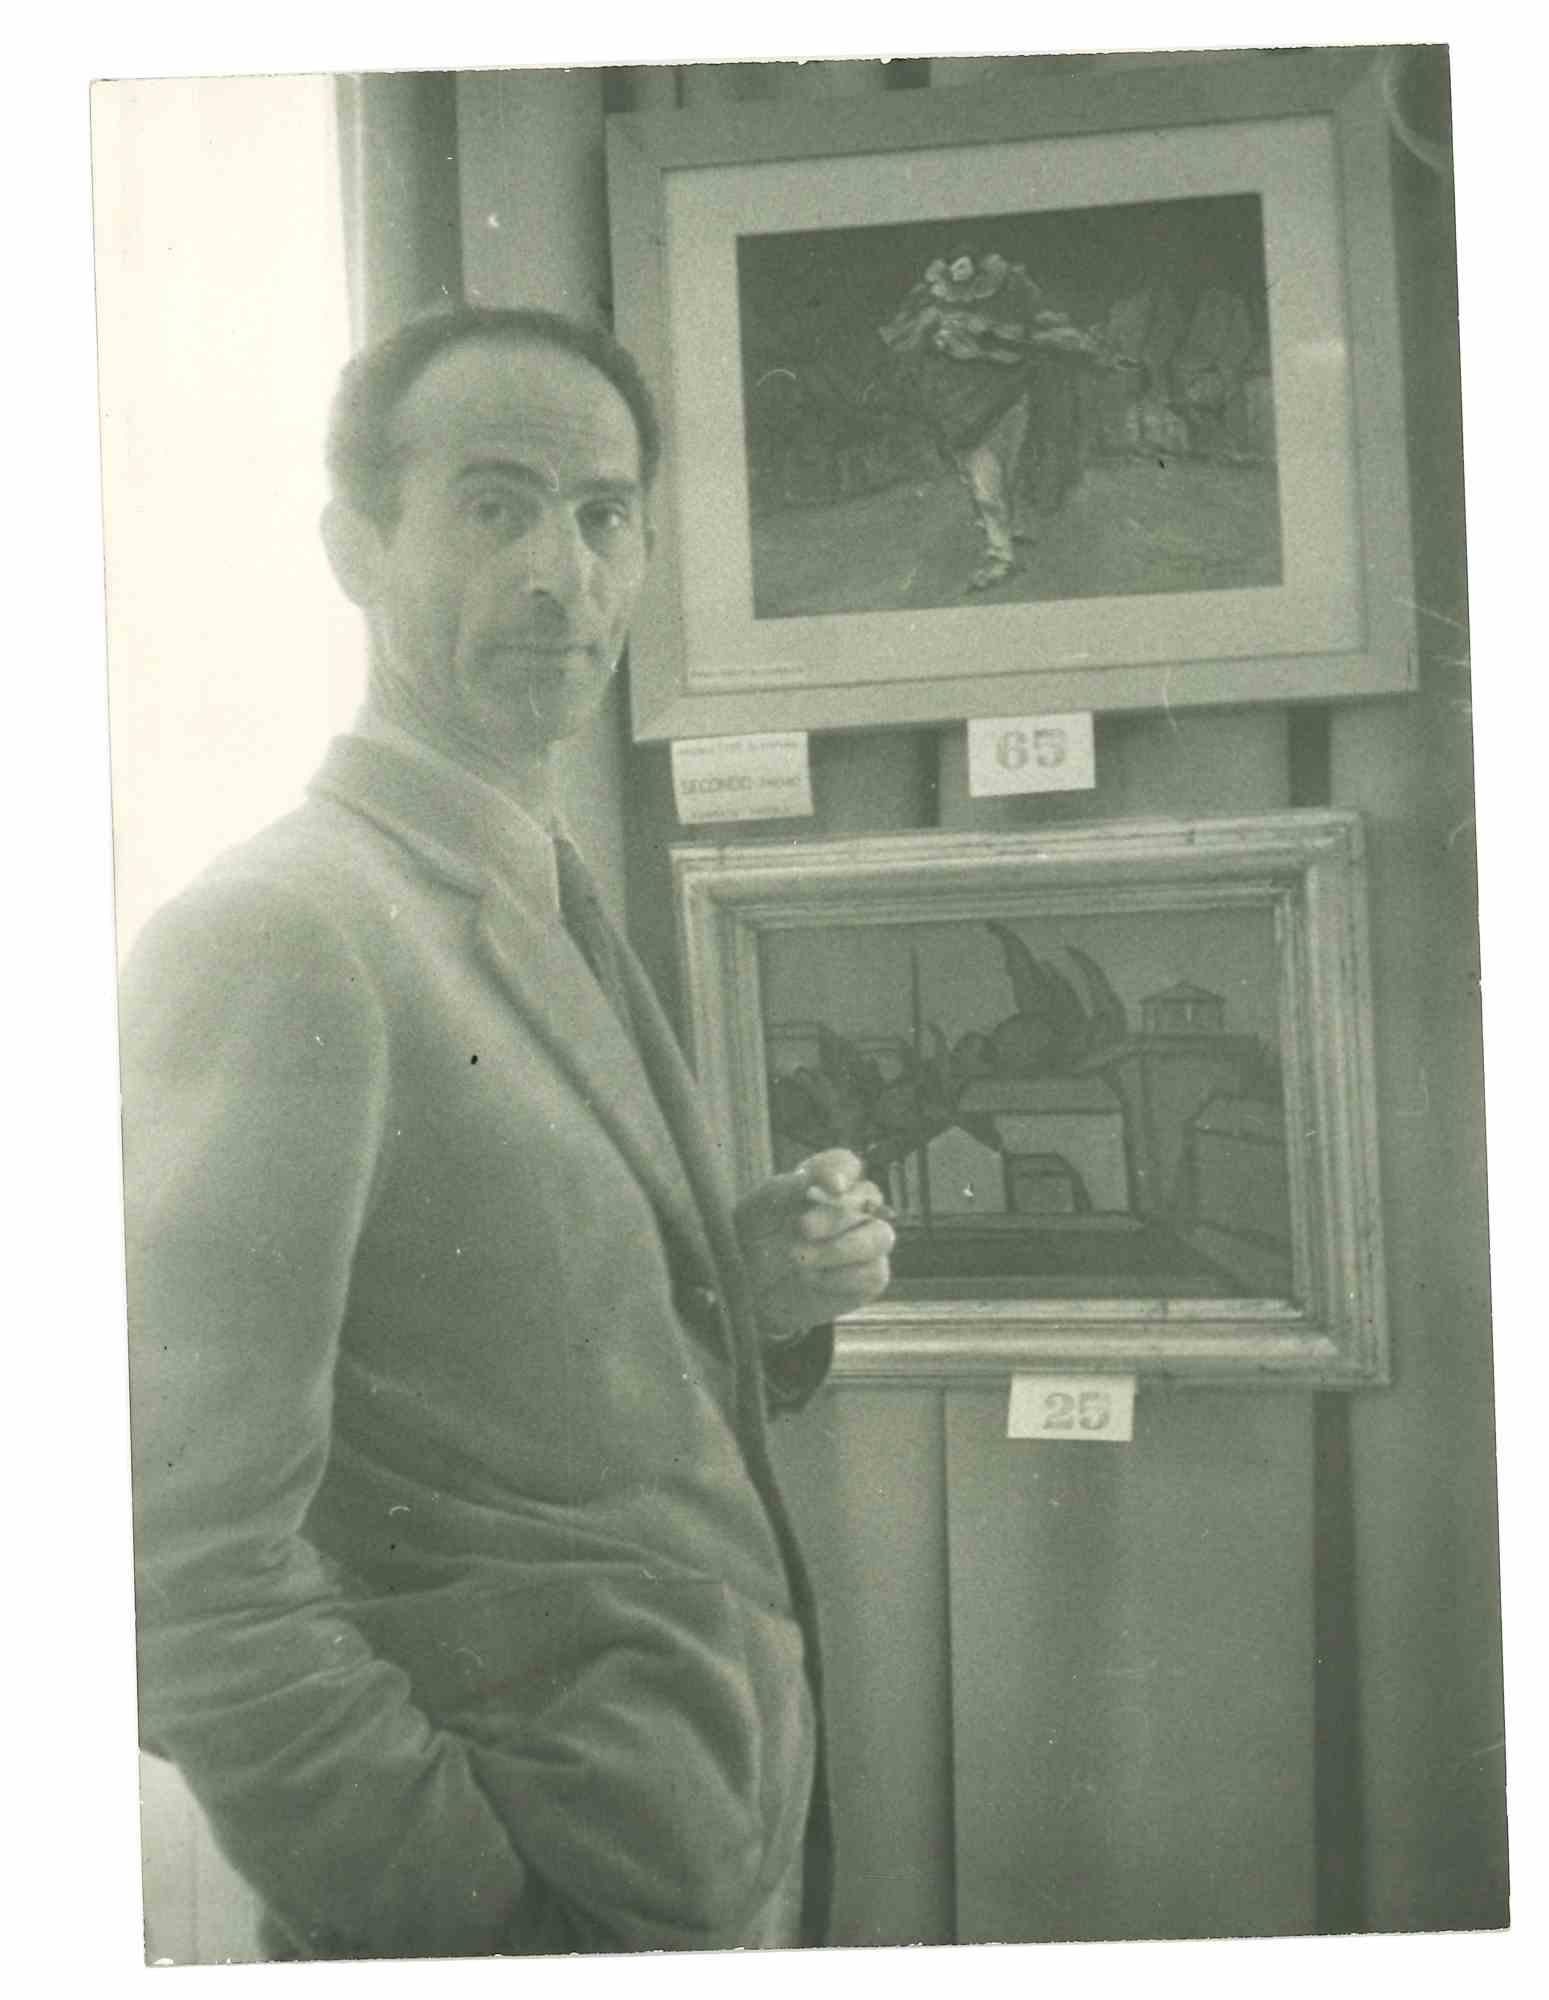 Unknown Portrait Photograph - Artist in Exhibition - Life in Italy - Photo - 1960s